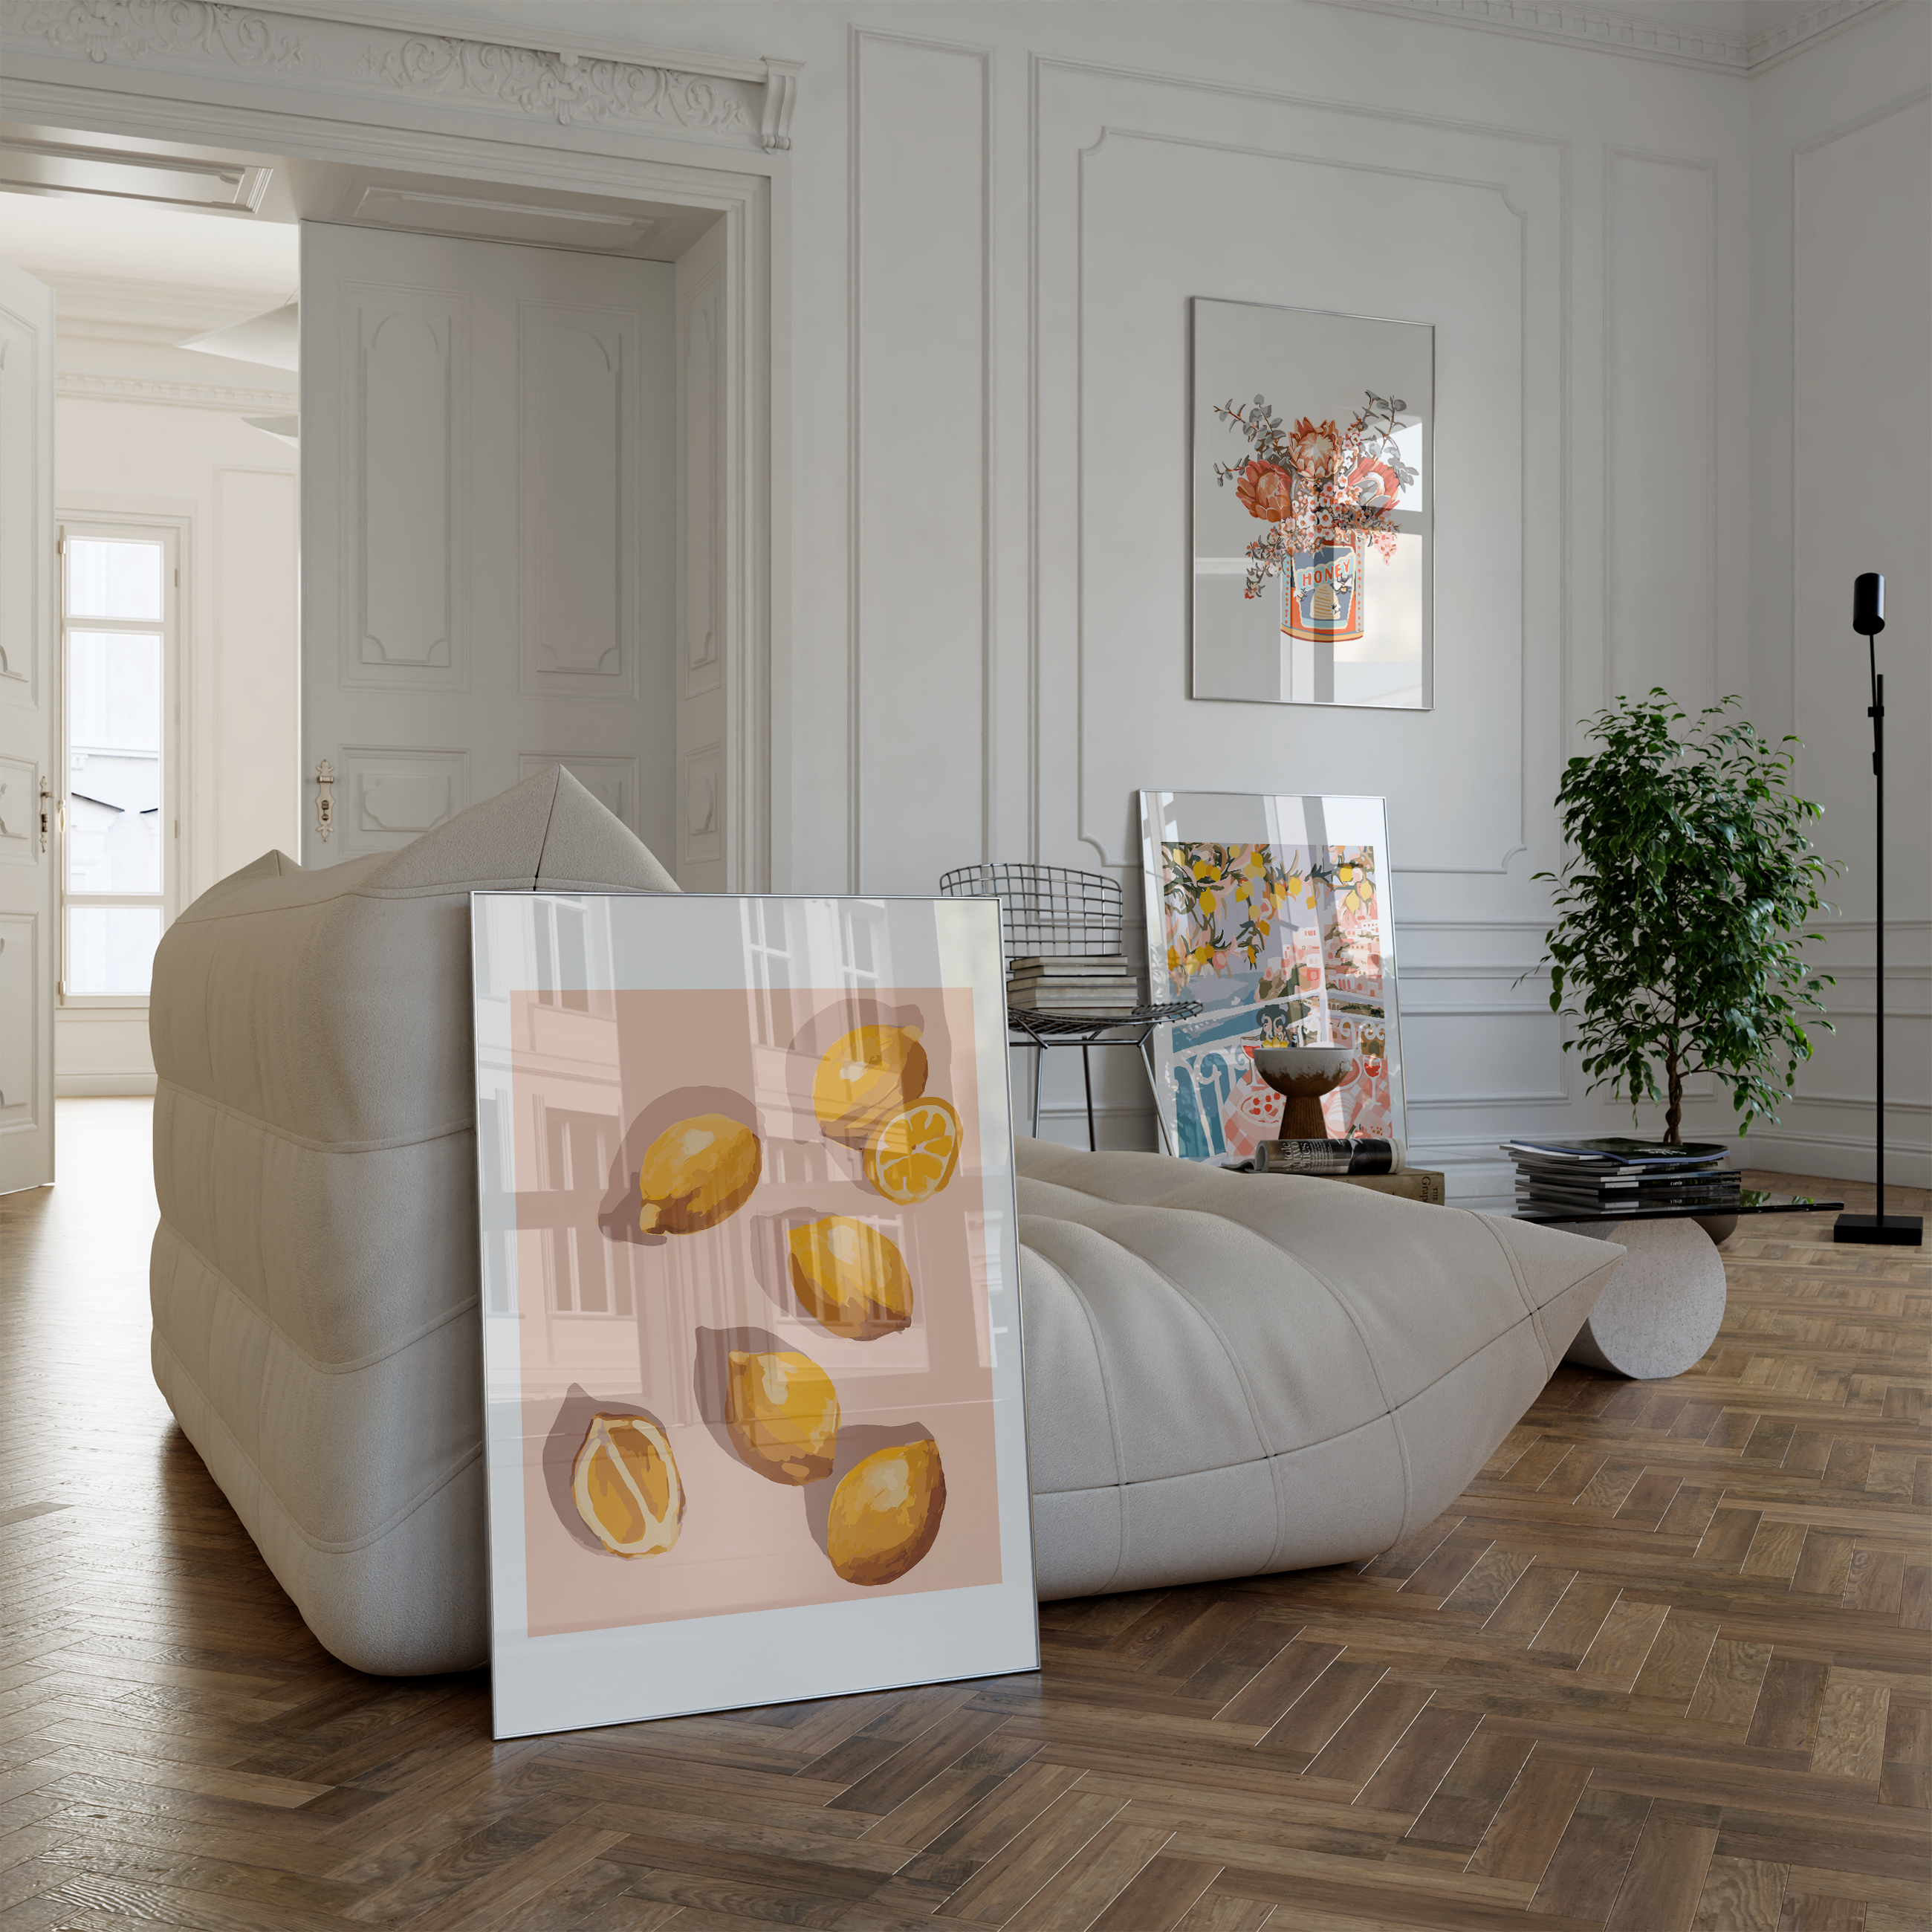 3 paint by number kits from paint like frida, framed, being displayed in a modern Parisian style apartment. 